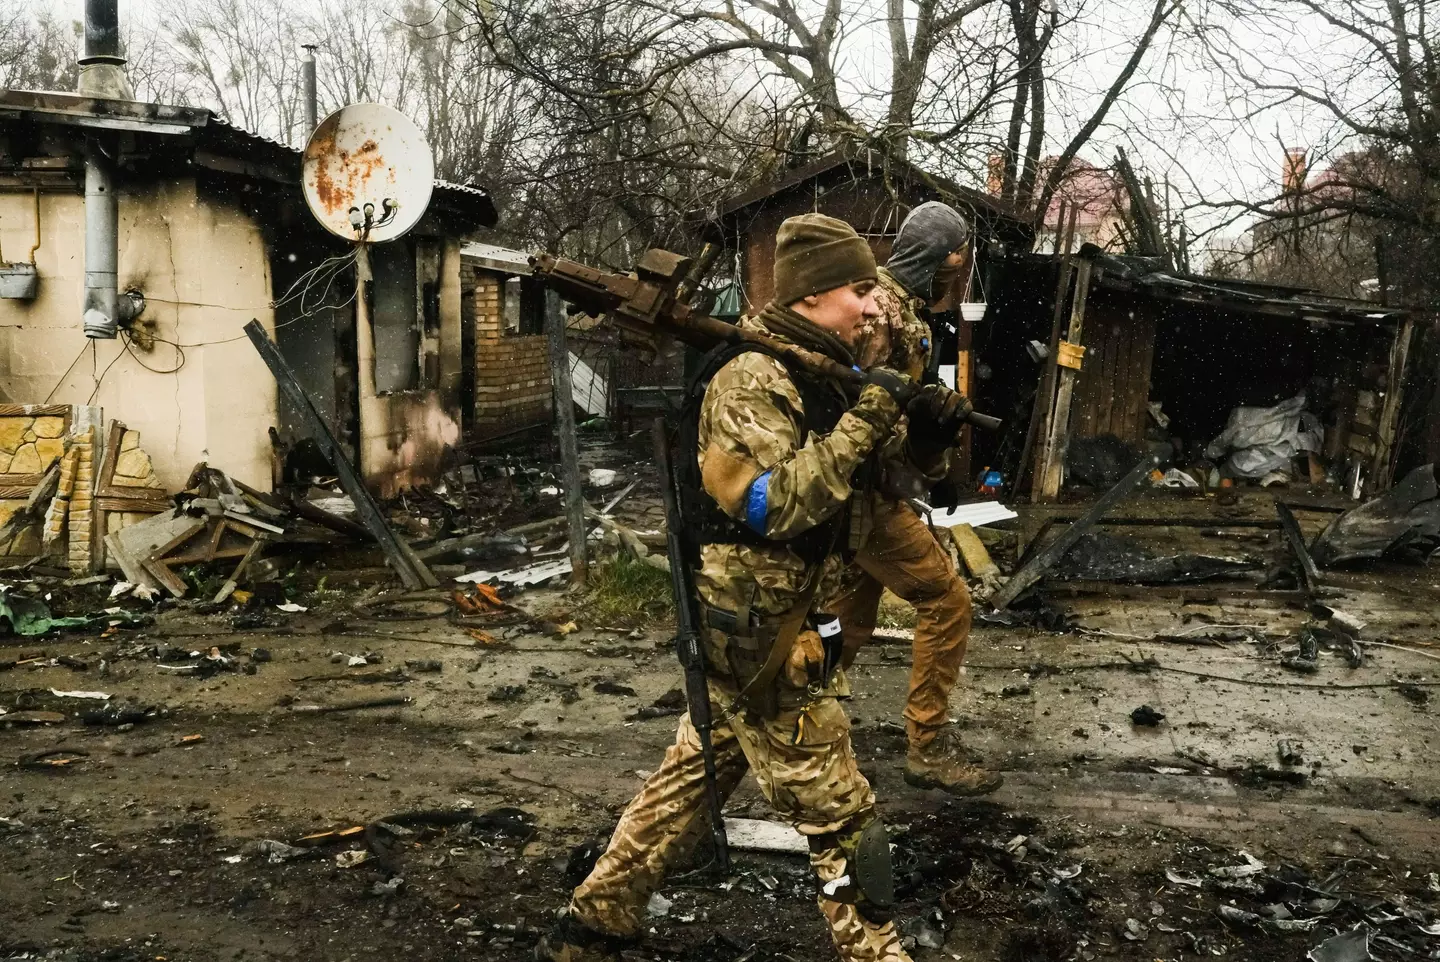 Ukrainian soldiers inspecting the decimated town of Bucha.